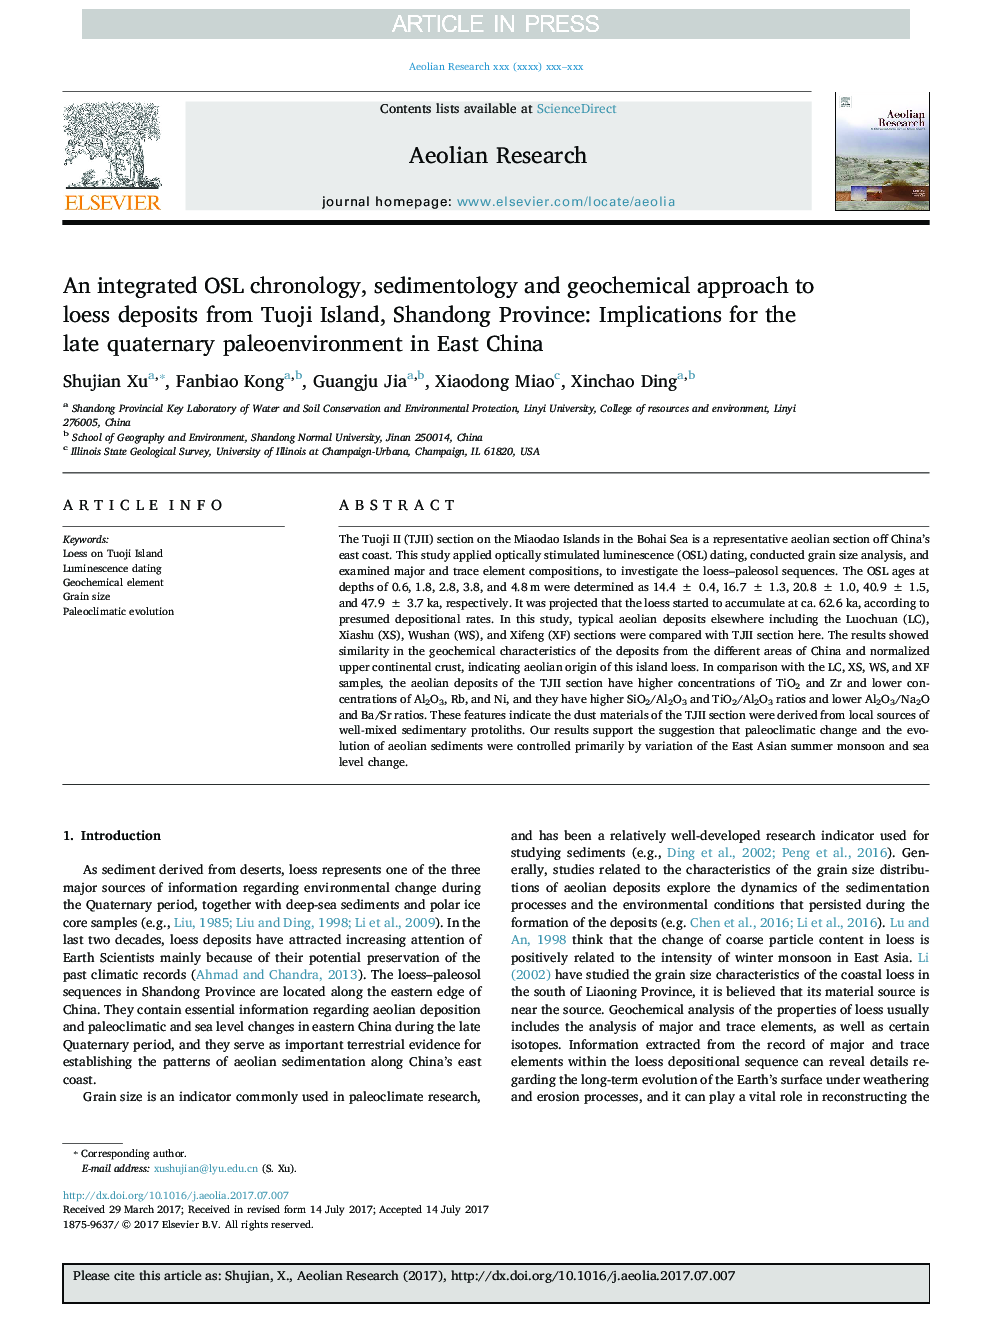 An integrated OSL chronology, sedimentology and geochemical approach to loess deposits from Tuoji Island, Shandong Province: Implications for the late quaternary paleoenvironment in East China